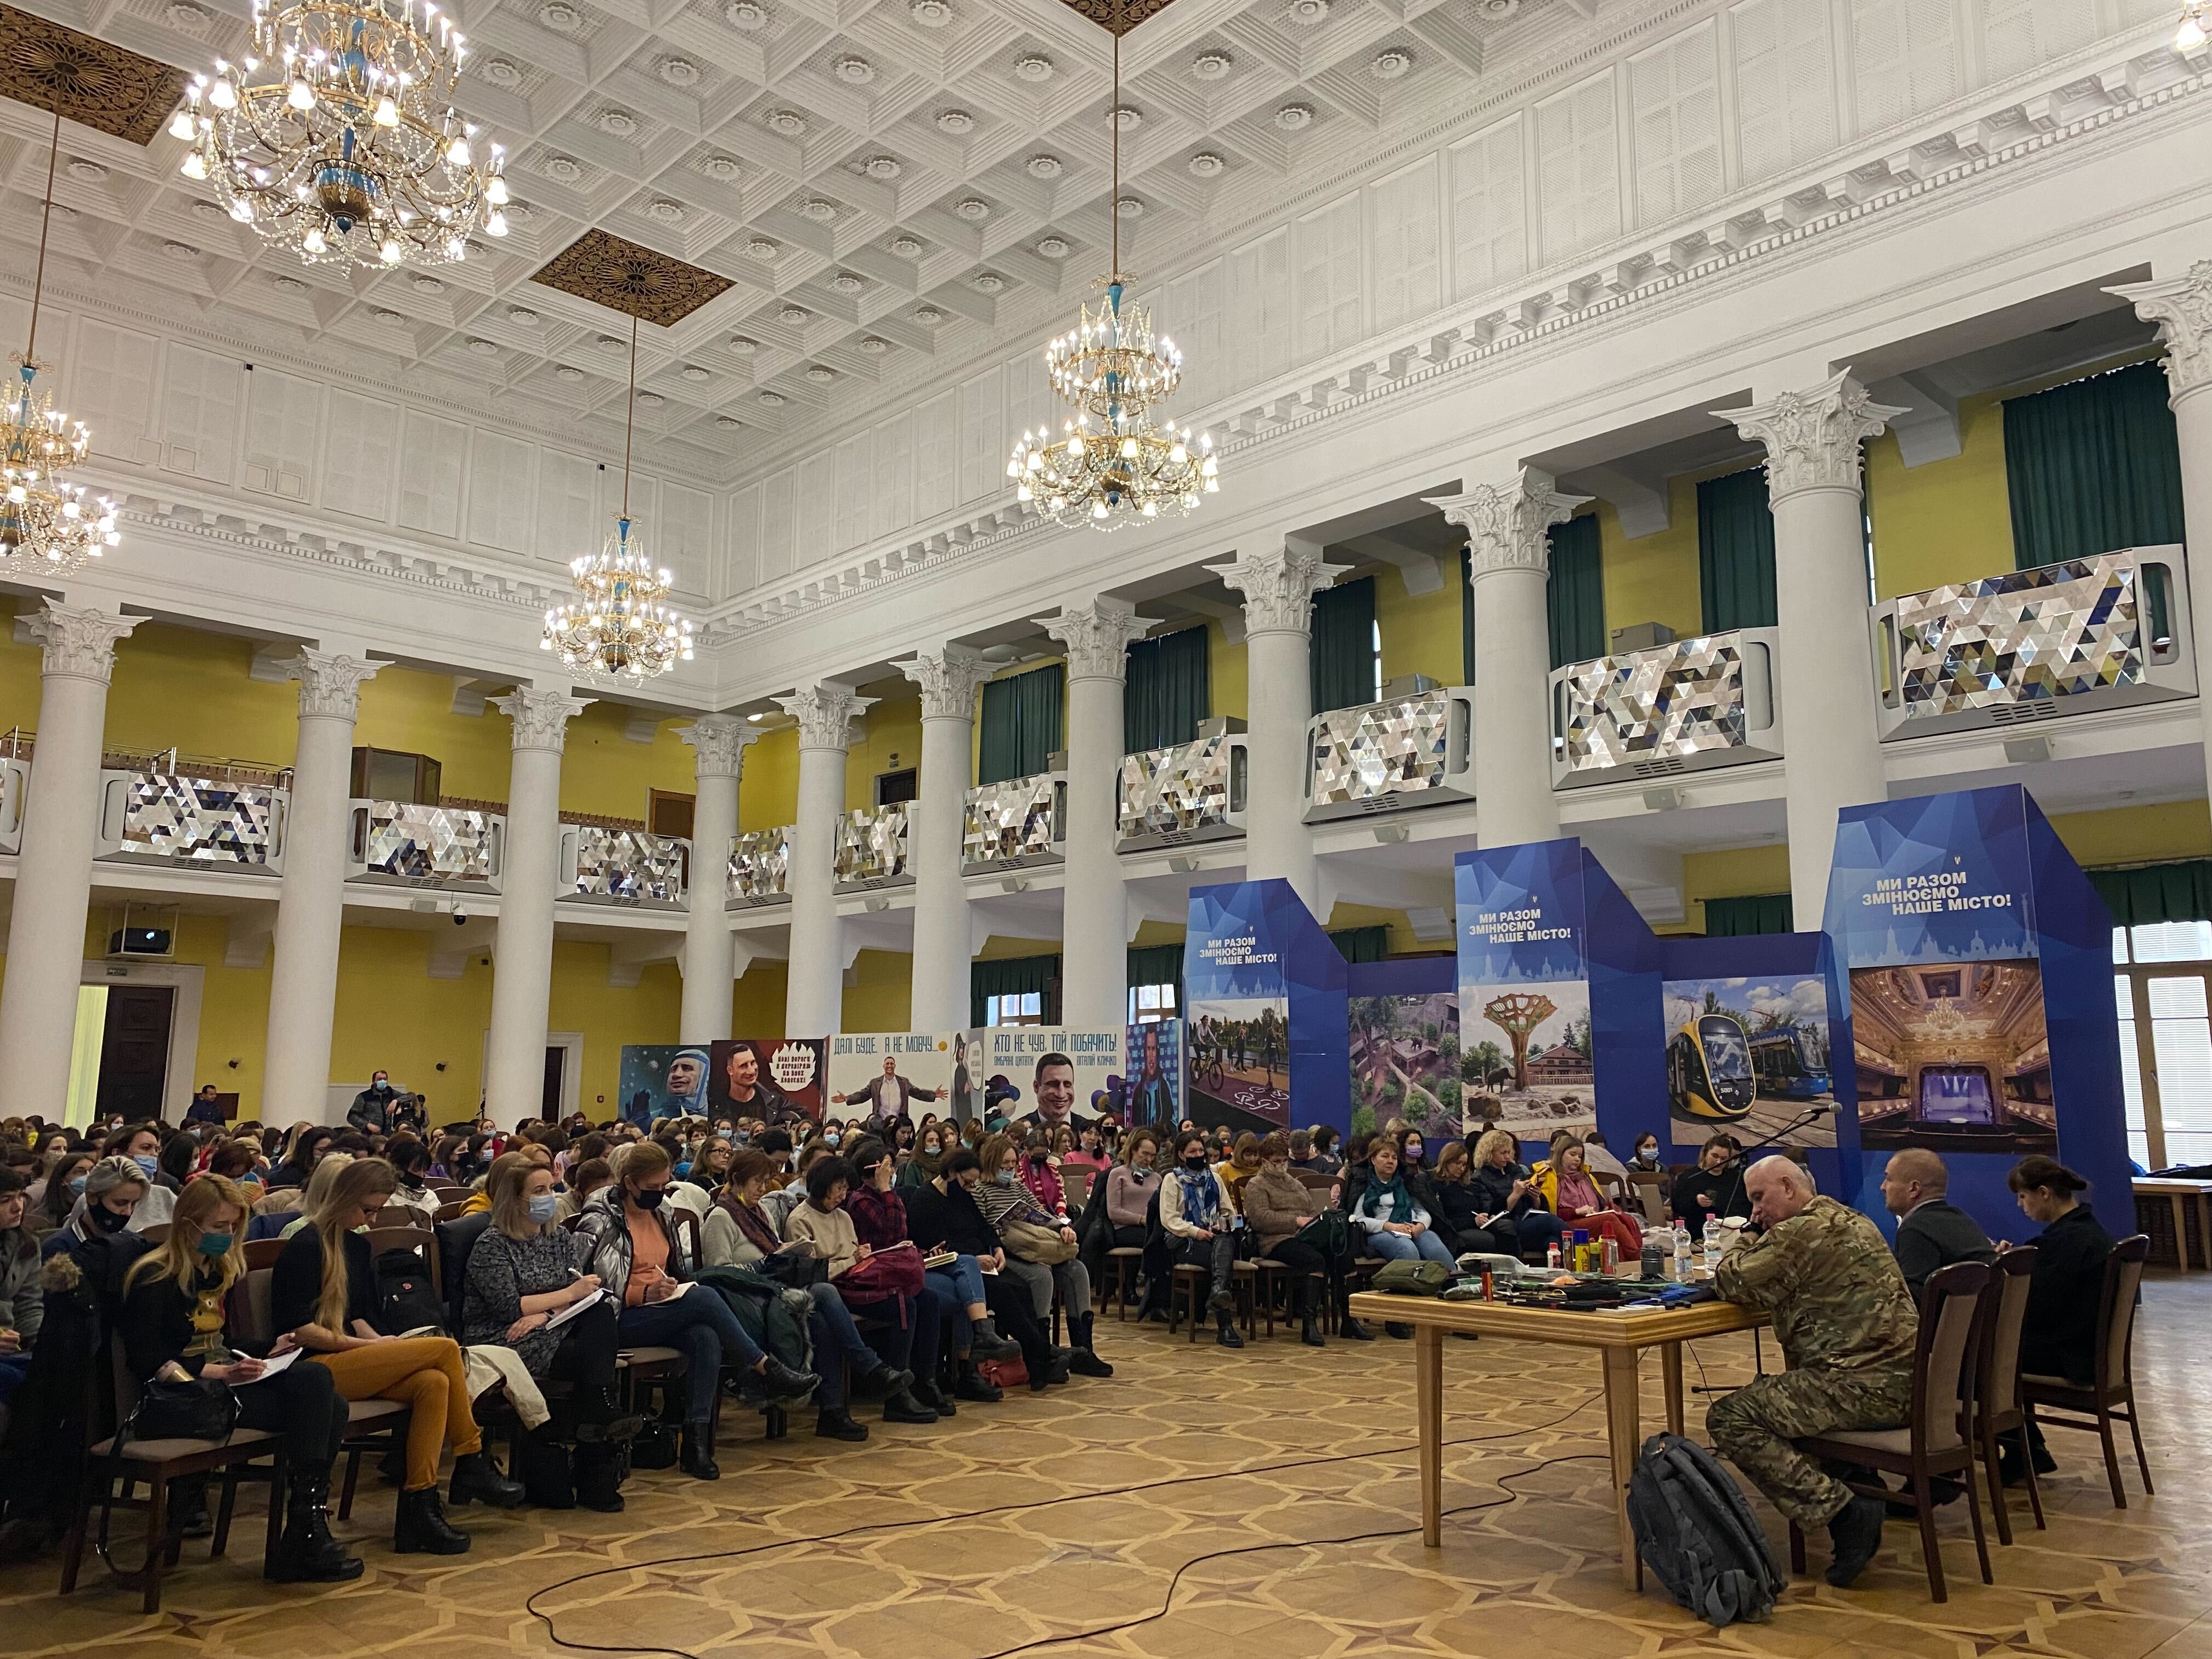 Around 240 women attended the survival training at Kyiv's town hall on Saturday.